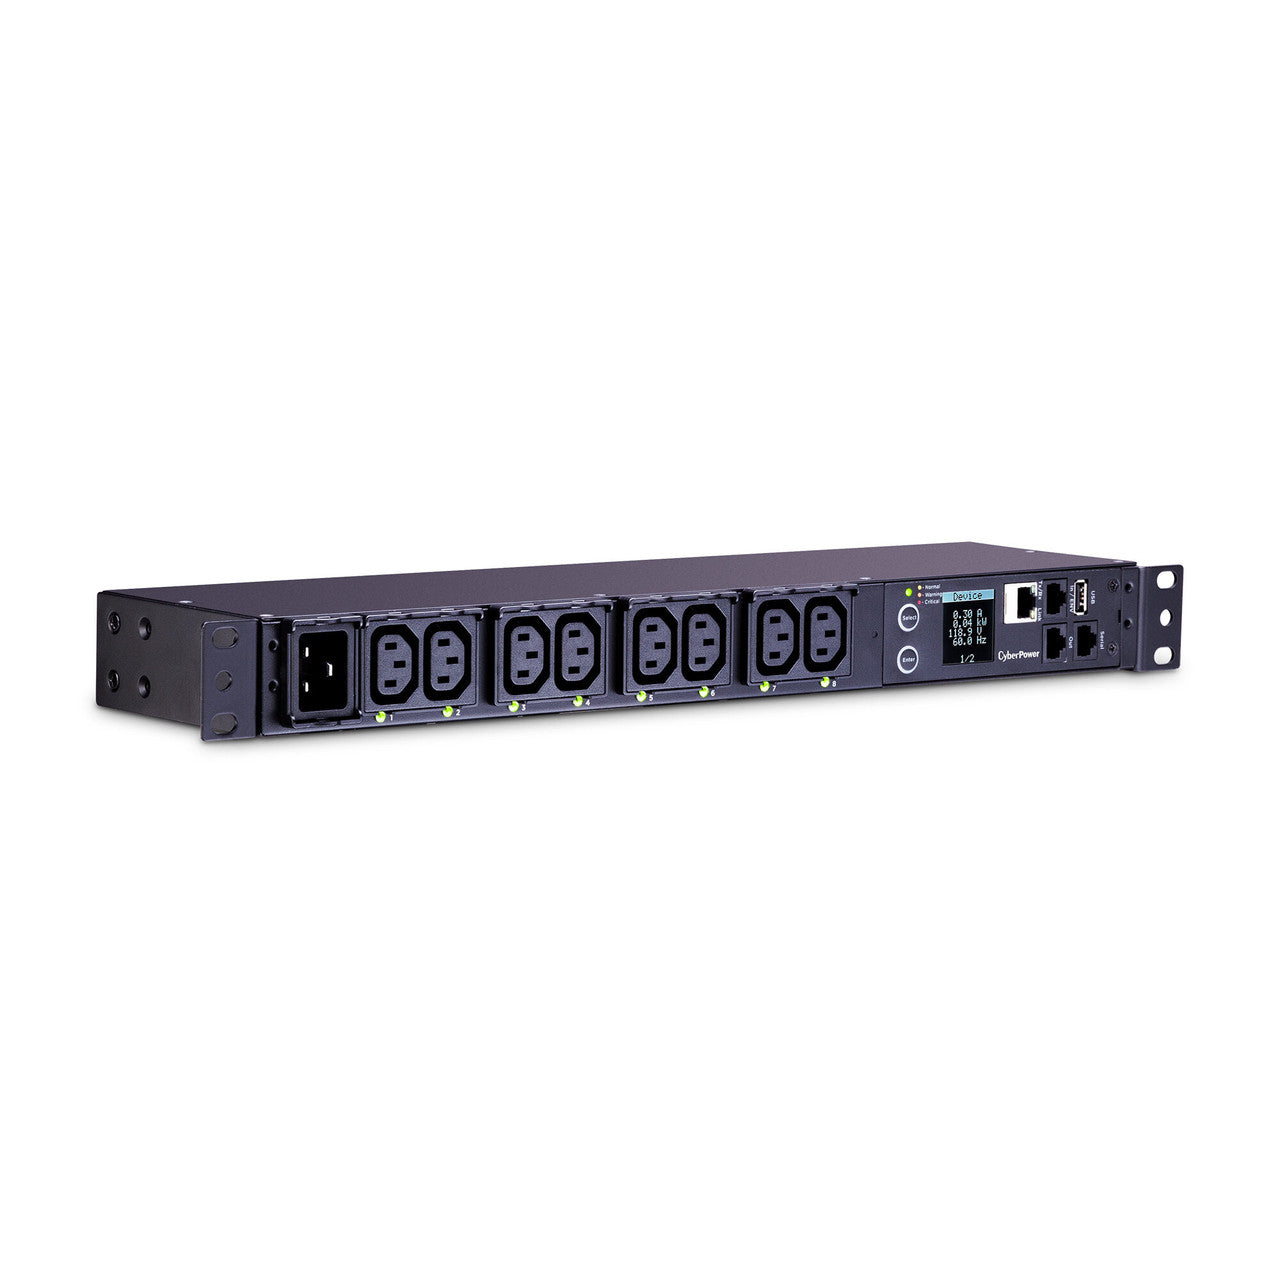 CyberPower PDU81006 SW MBO PDU 20A 208V Metered-by-Outlet Switched PDU 8 C13 Outlets 10ft cord 3yr Warranty